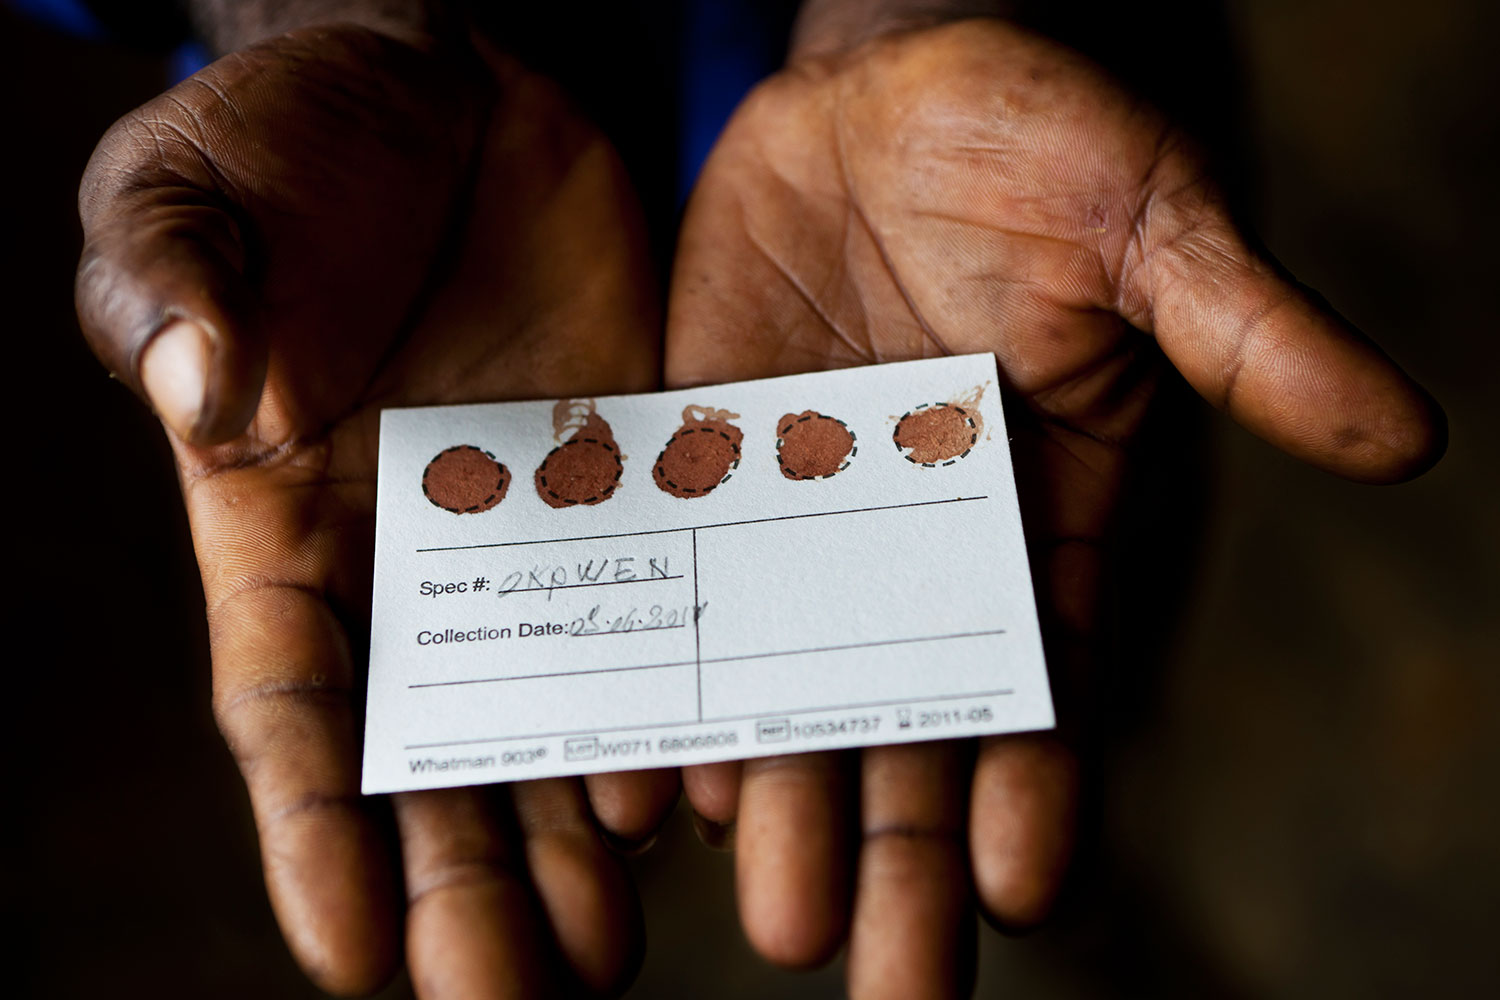 Wolfe’s team distributes specialized preserving paper to hunters and ask that they note the location of their kills and mark the paper with five drops of blood from each animal. The team then collects the paper and screens them for viruses. Nyabissam, Cameroon. July 27, 2011